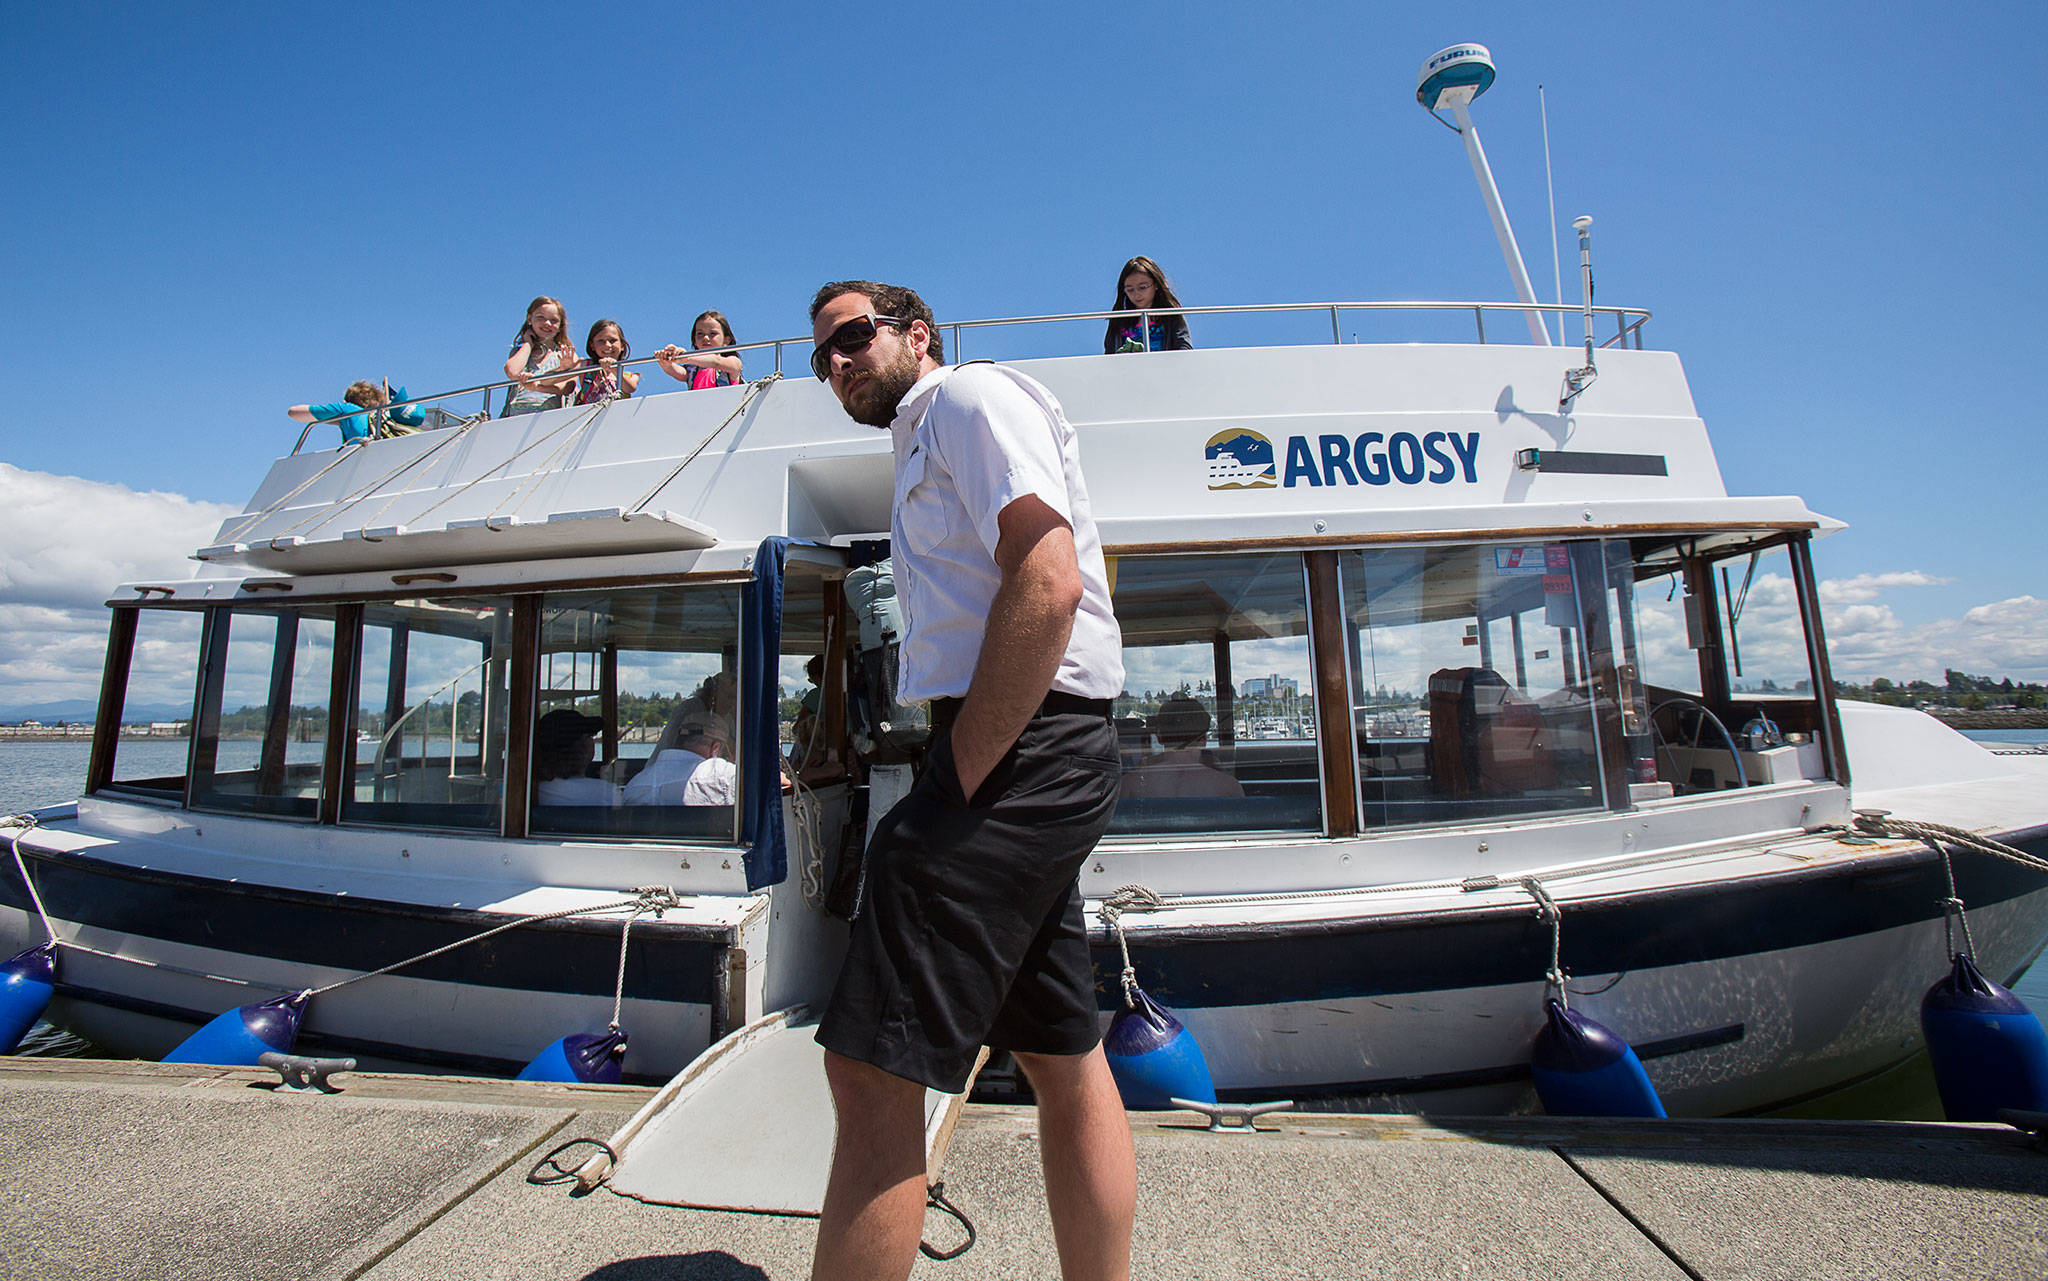 An Argosy Cruises captain of the Jetty Island ferry waits for passengers July 6, 2016 in Everett. The ferry service is set to resume this summer after being cancelled last year during the pandemic. (Andy Bronson / The Herald)